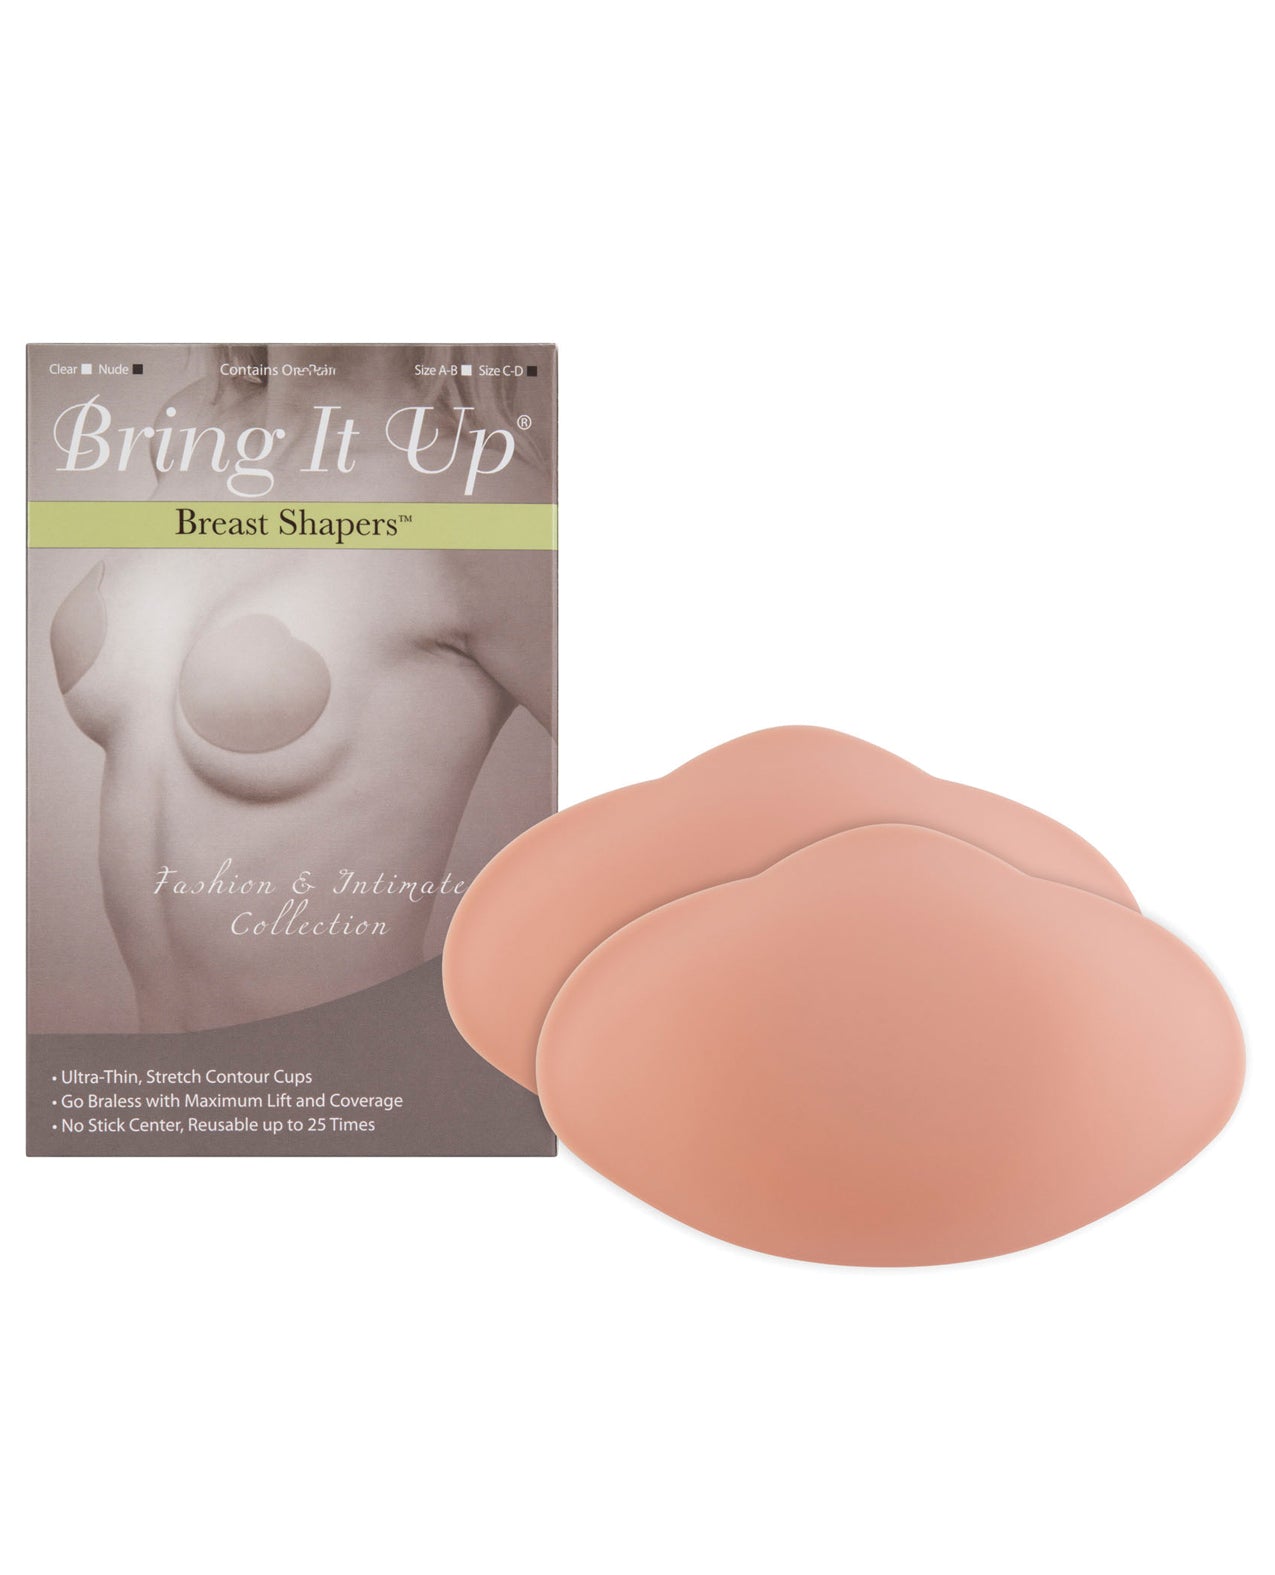 Bring it Up Breast Shapers - Nude C/D Cup 25 or More Uses - Essence Of Nature LLC